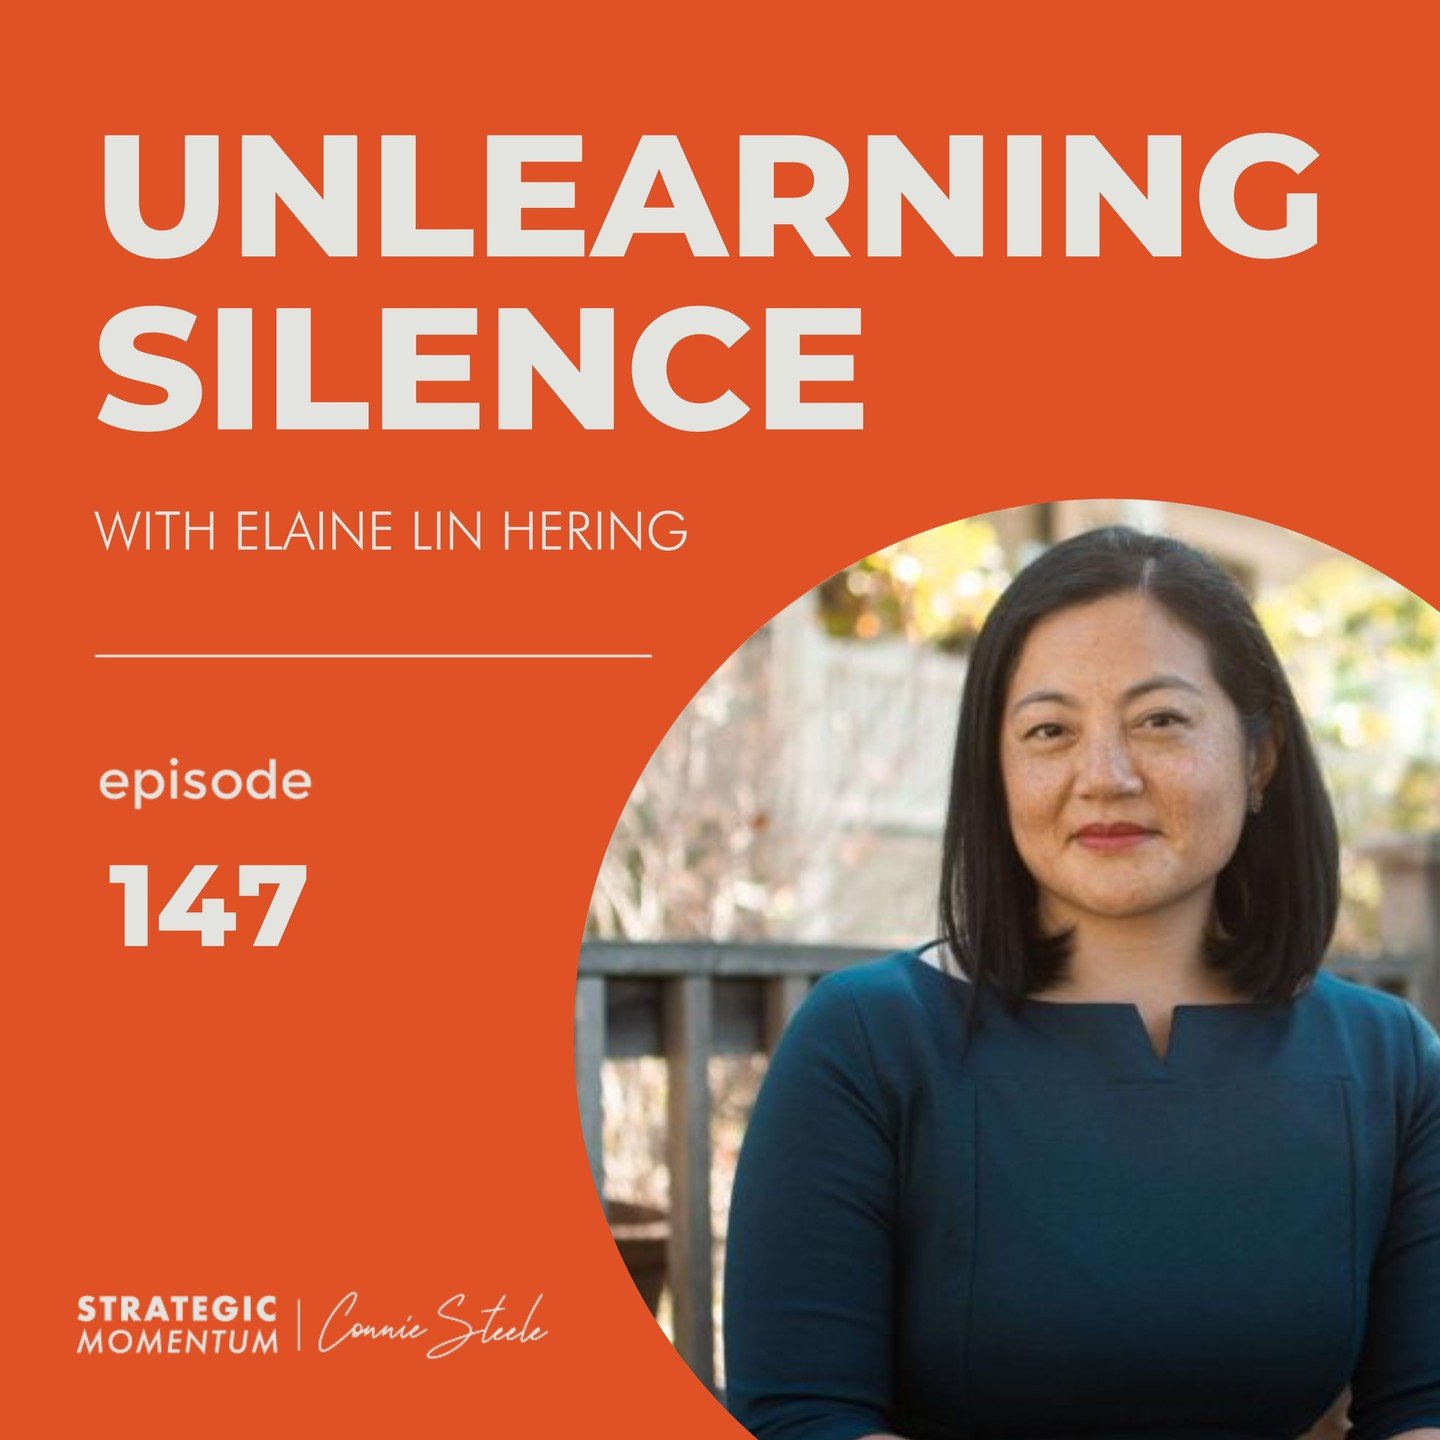 Have you ever felt your voice isn&rsquo;t welcome in a conversation or meeting?

Have you been told that you need to speak up more &mdash; but when you did, there were still negative ramifications? In short, we have felt silenced.

@elainelinhering, 